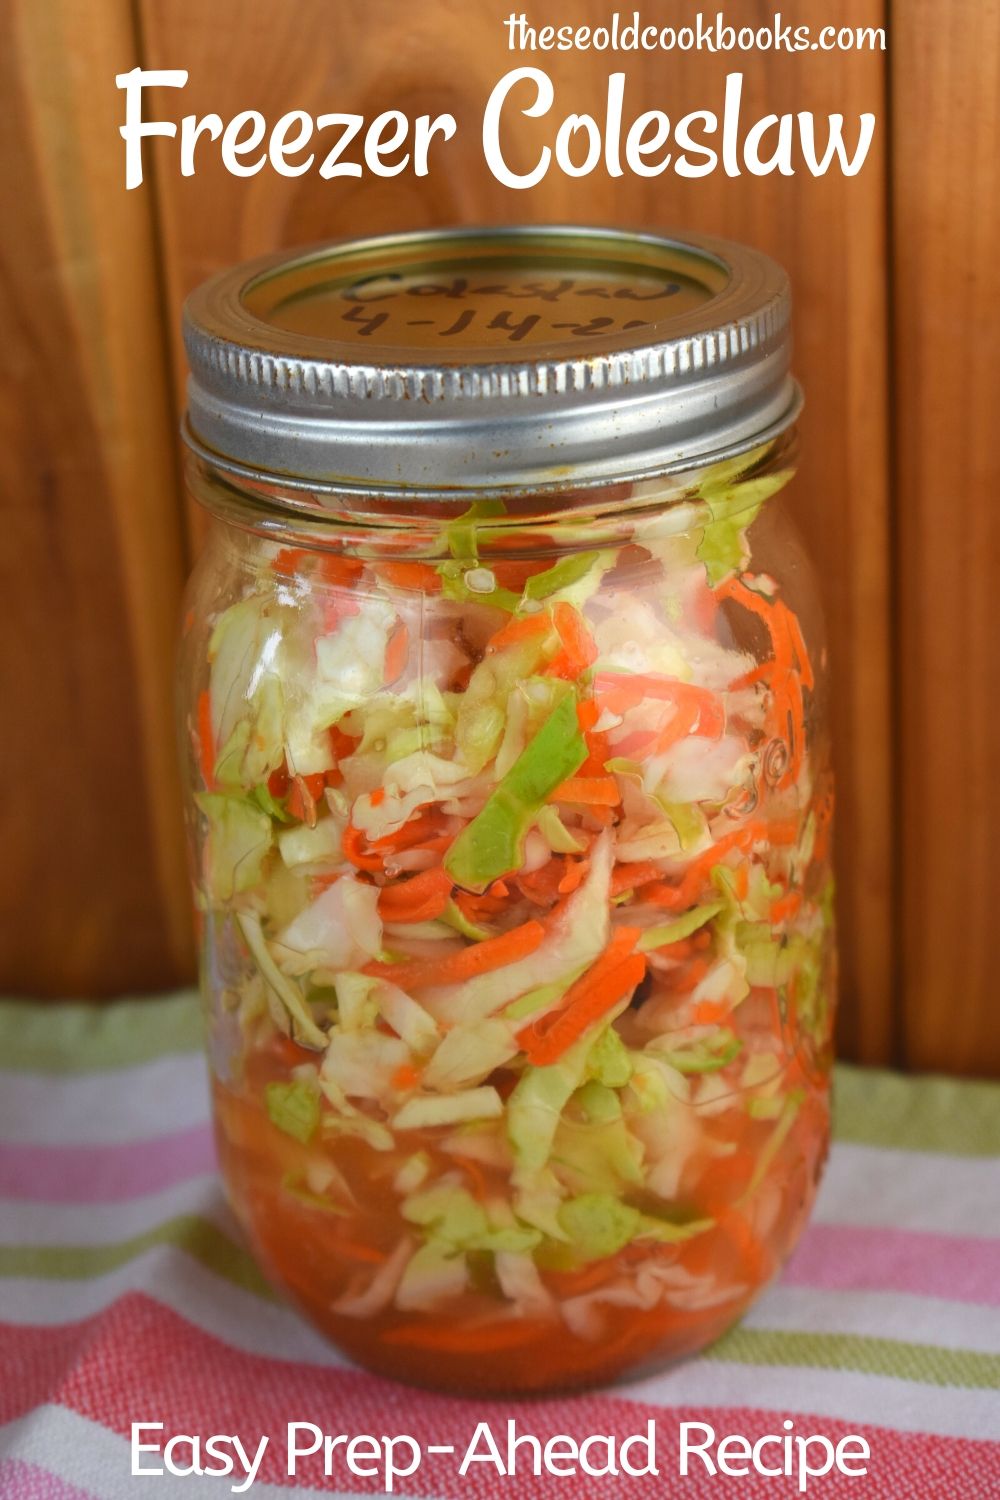 When you are in need of a quick side dish on a busy weeknight, it's very convenient to pull out one of these pints of old fashioned freezer slaw to serve along your main dish.